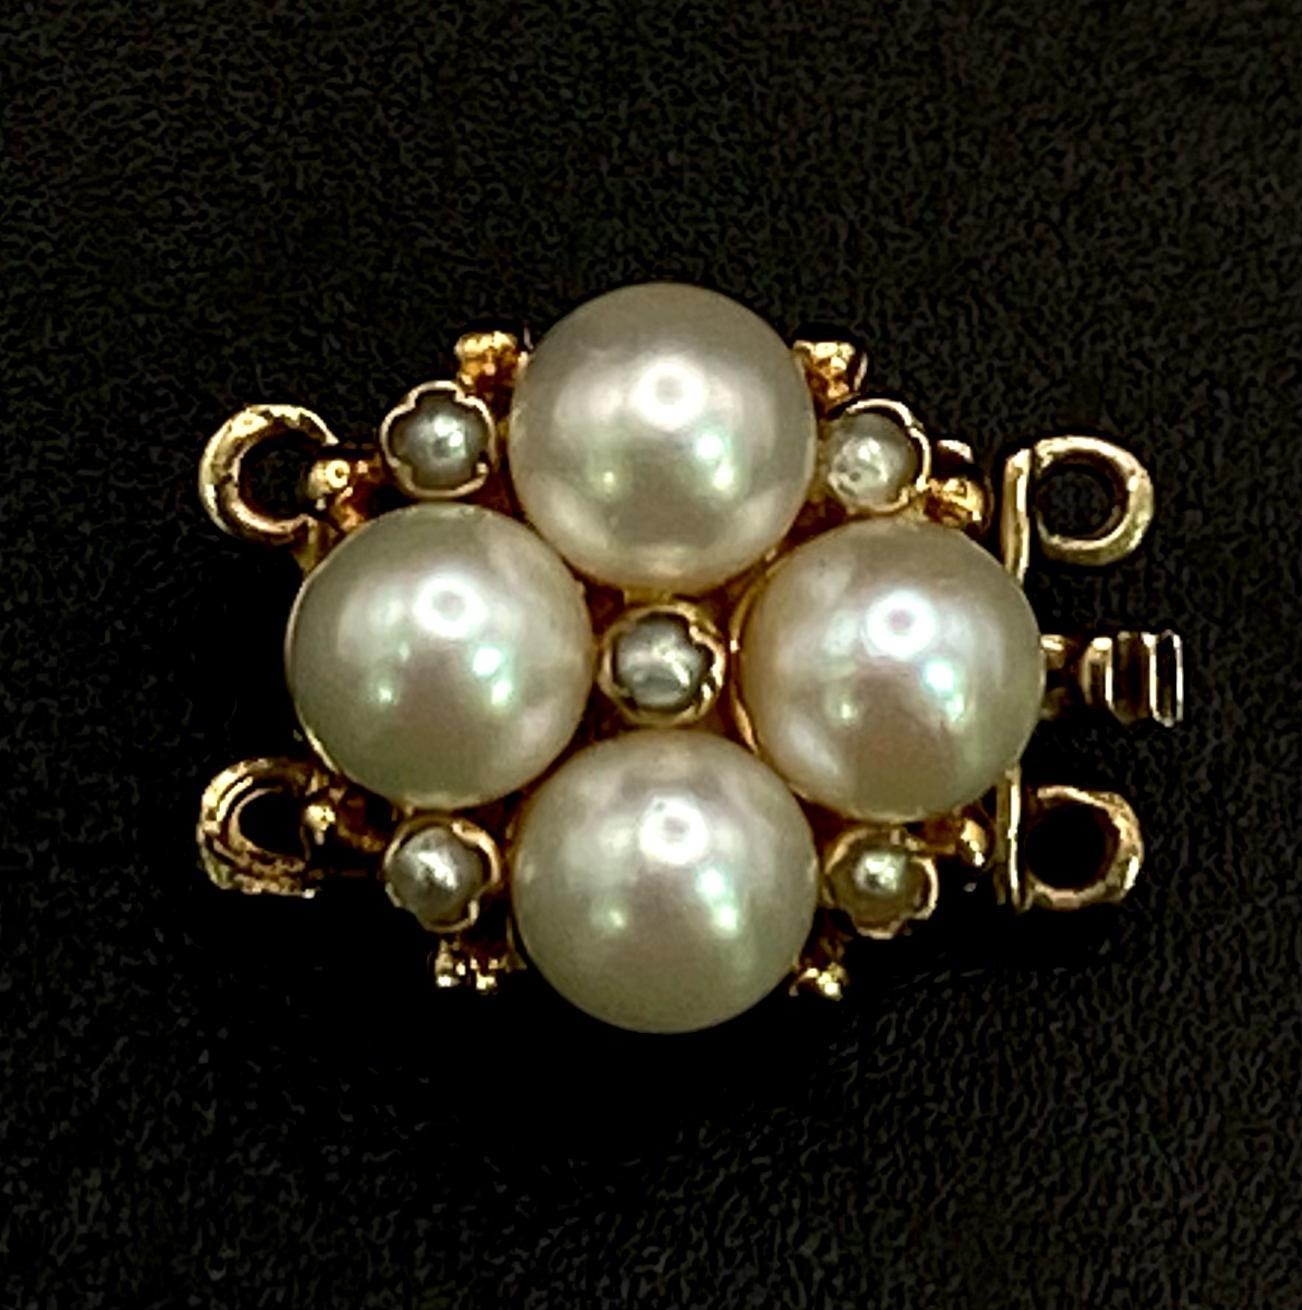 A Vintage 9K Yellow Gold and Seed Pearl Jewellery Clasp. Perfect for a four-strand necklace. 17mm. - Image 3 of 5